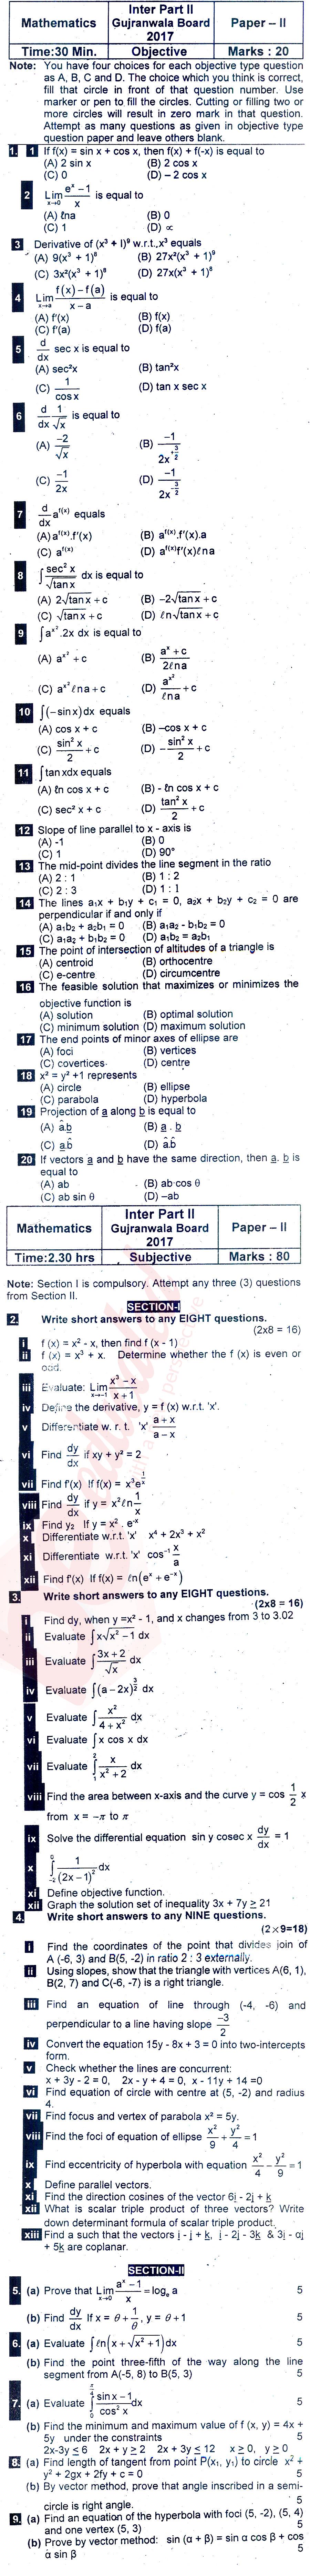 Math 12th class Past Paper Group 2 BISE Gujranwala 2017